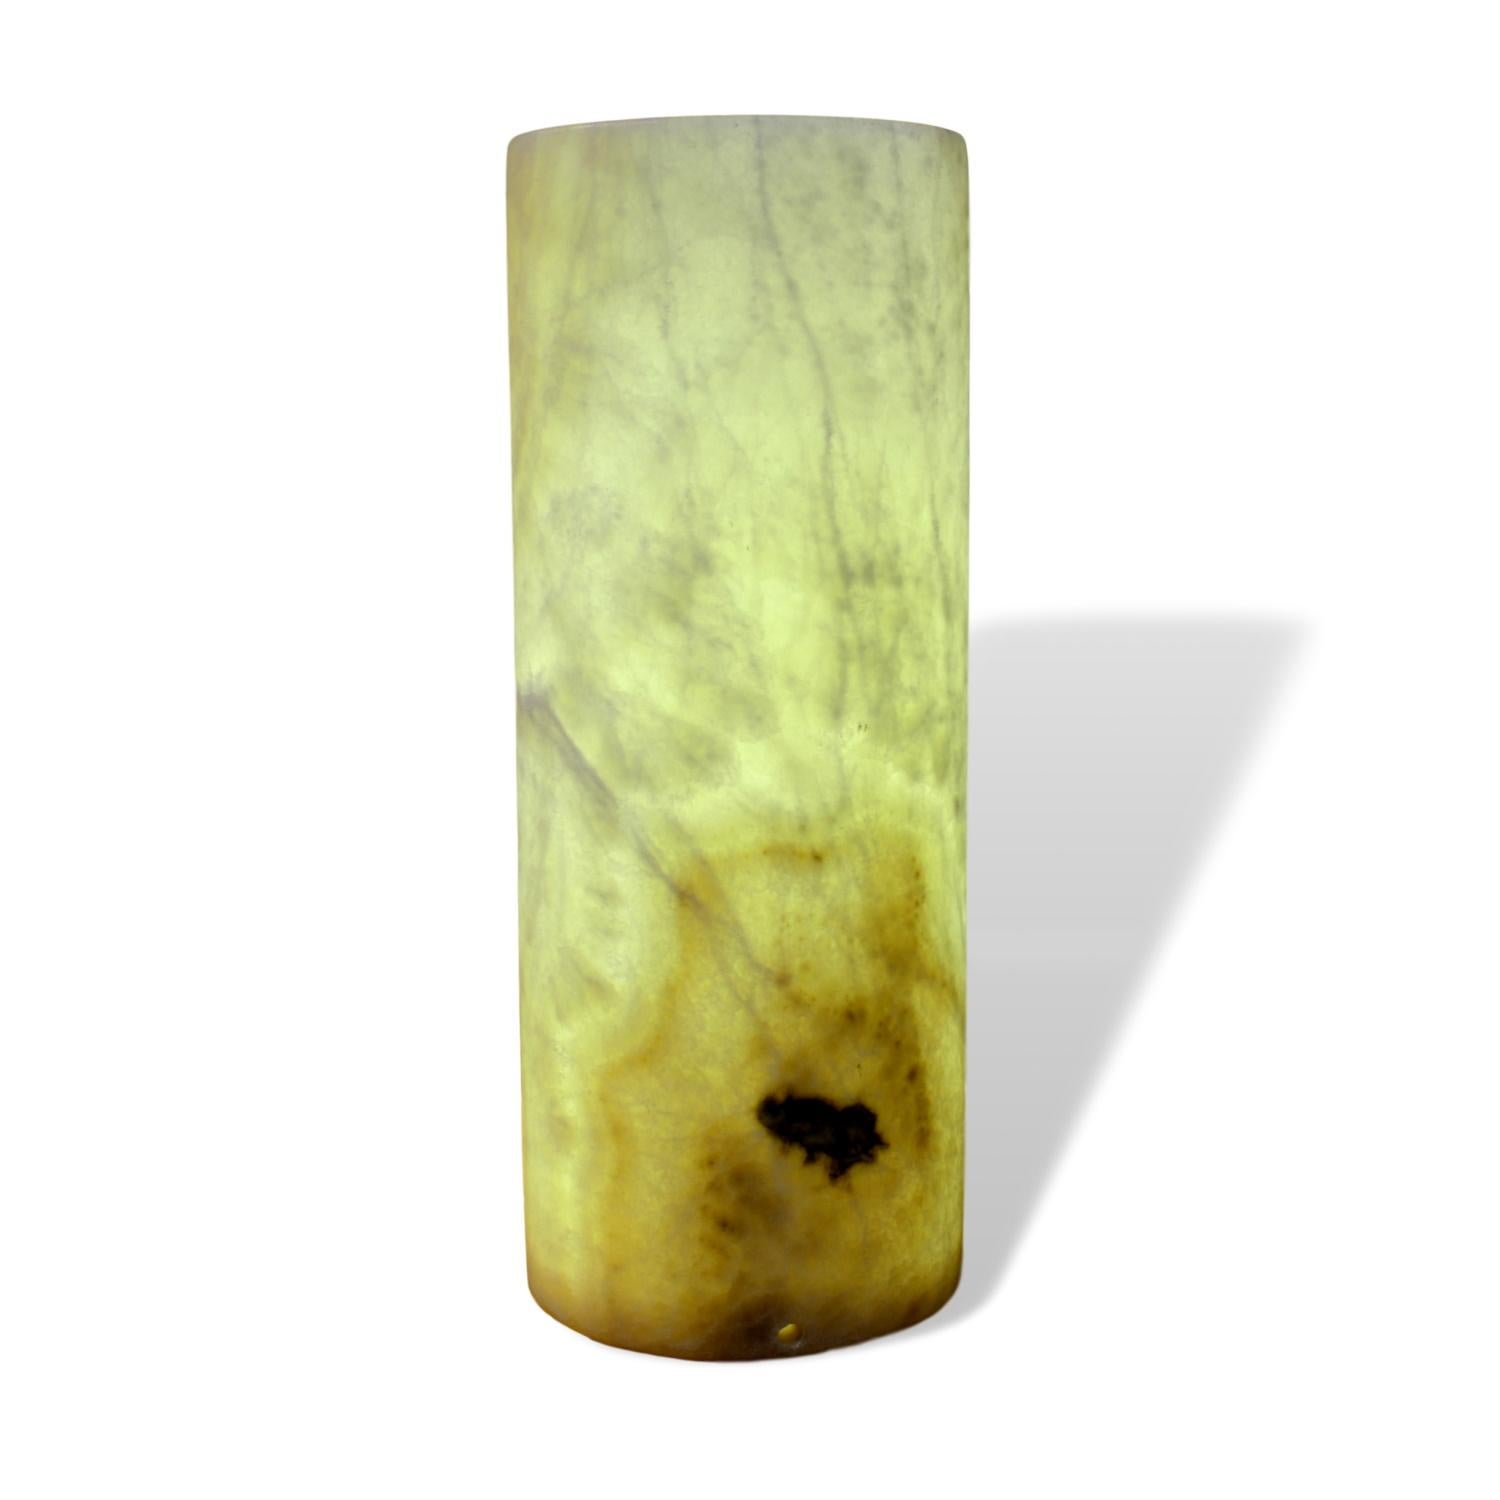 Ambient Table Lamp in Onyx In Excellent Condition For Sale In Stratford, CT